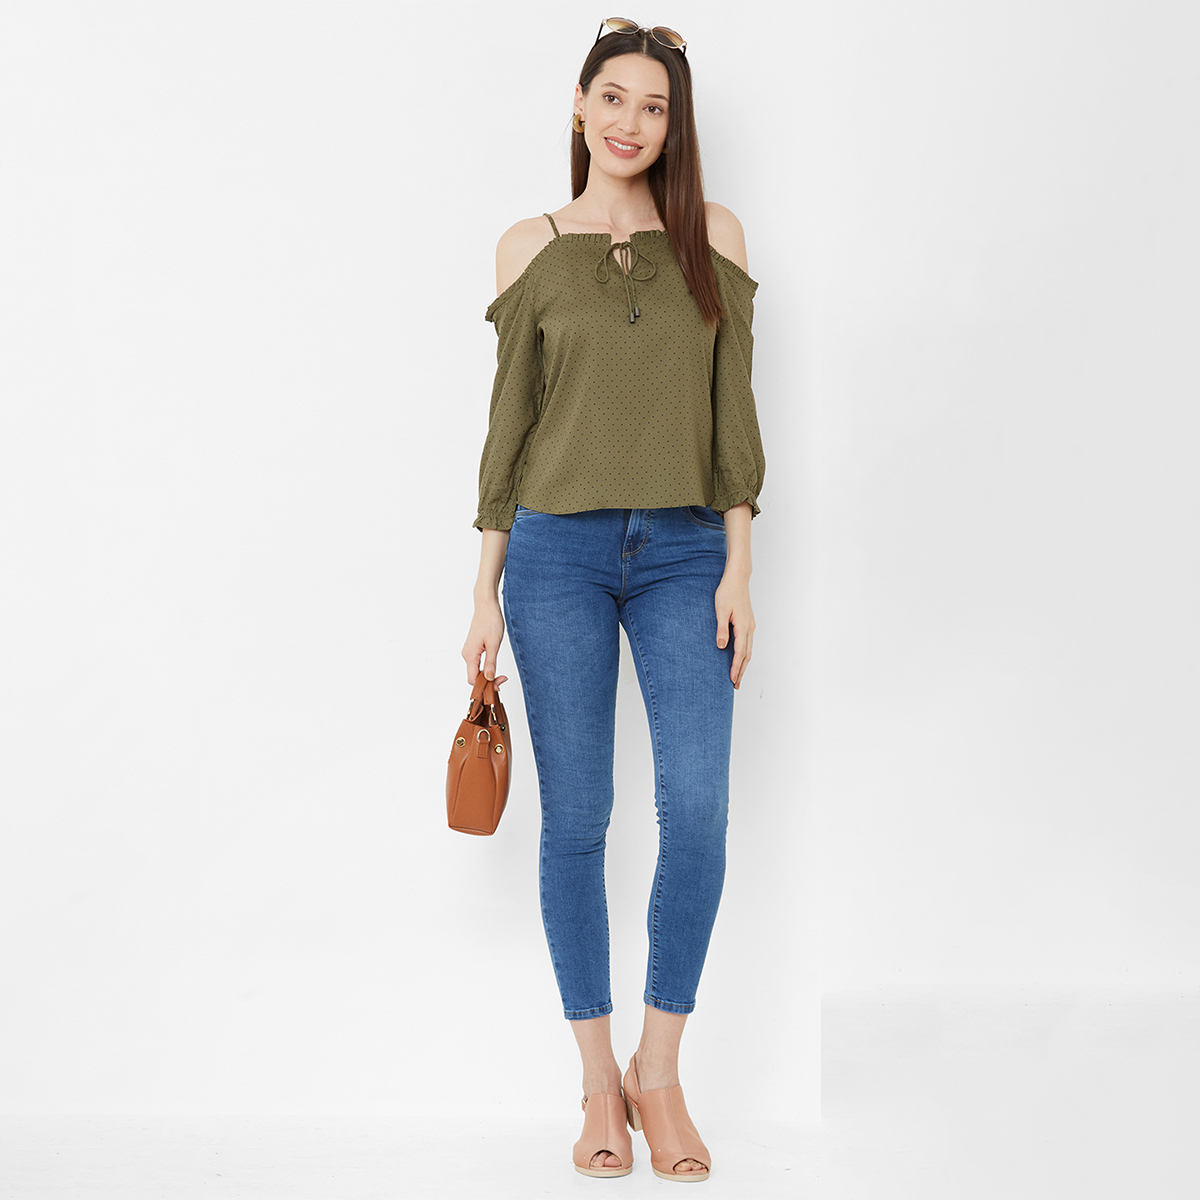 Kraus Jeans Casual Top for Women Olive